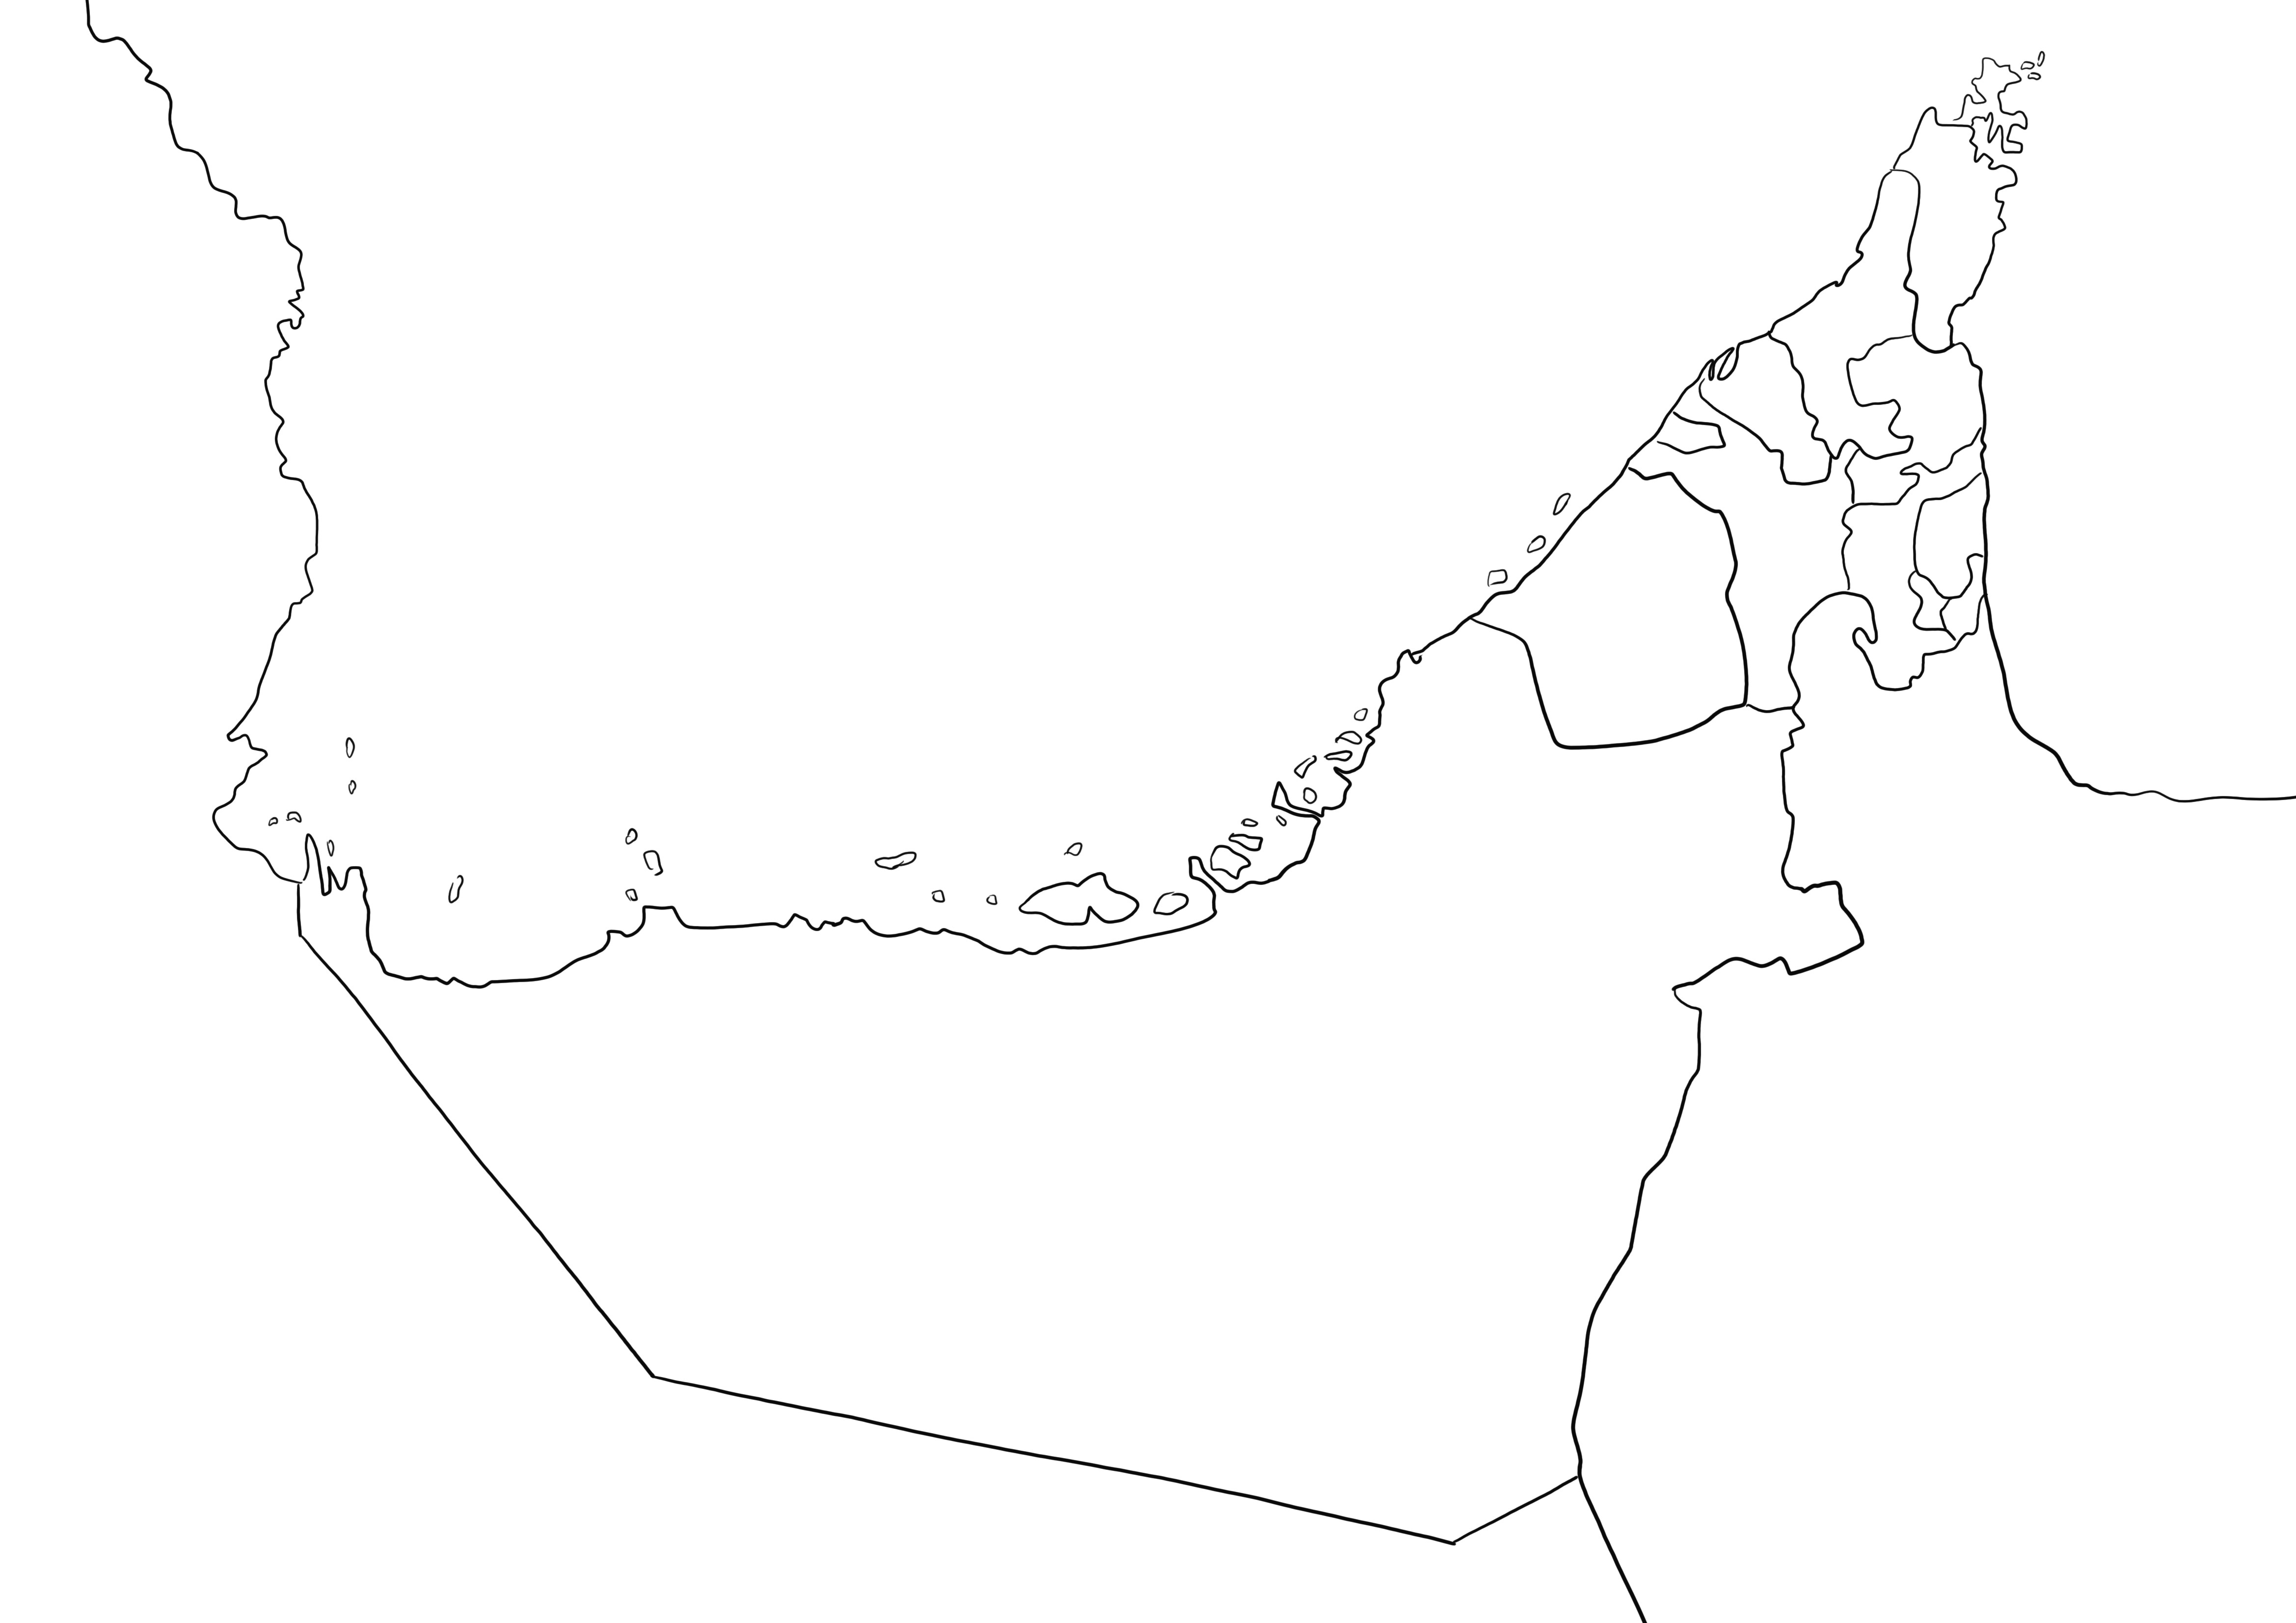 United Arab Emirates Map plain page free printable in black and white easy to color by kids